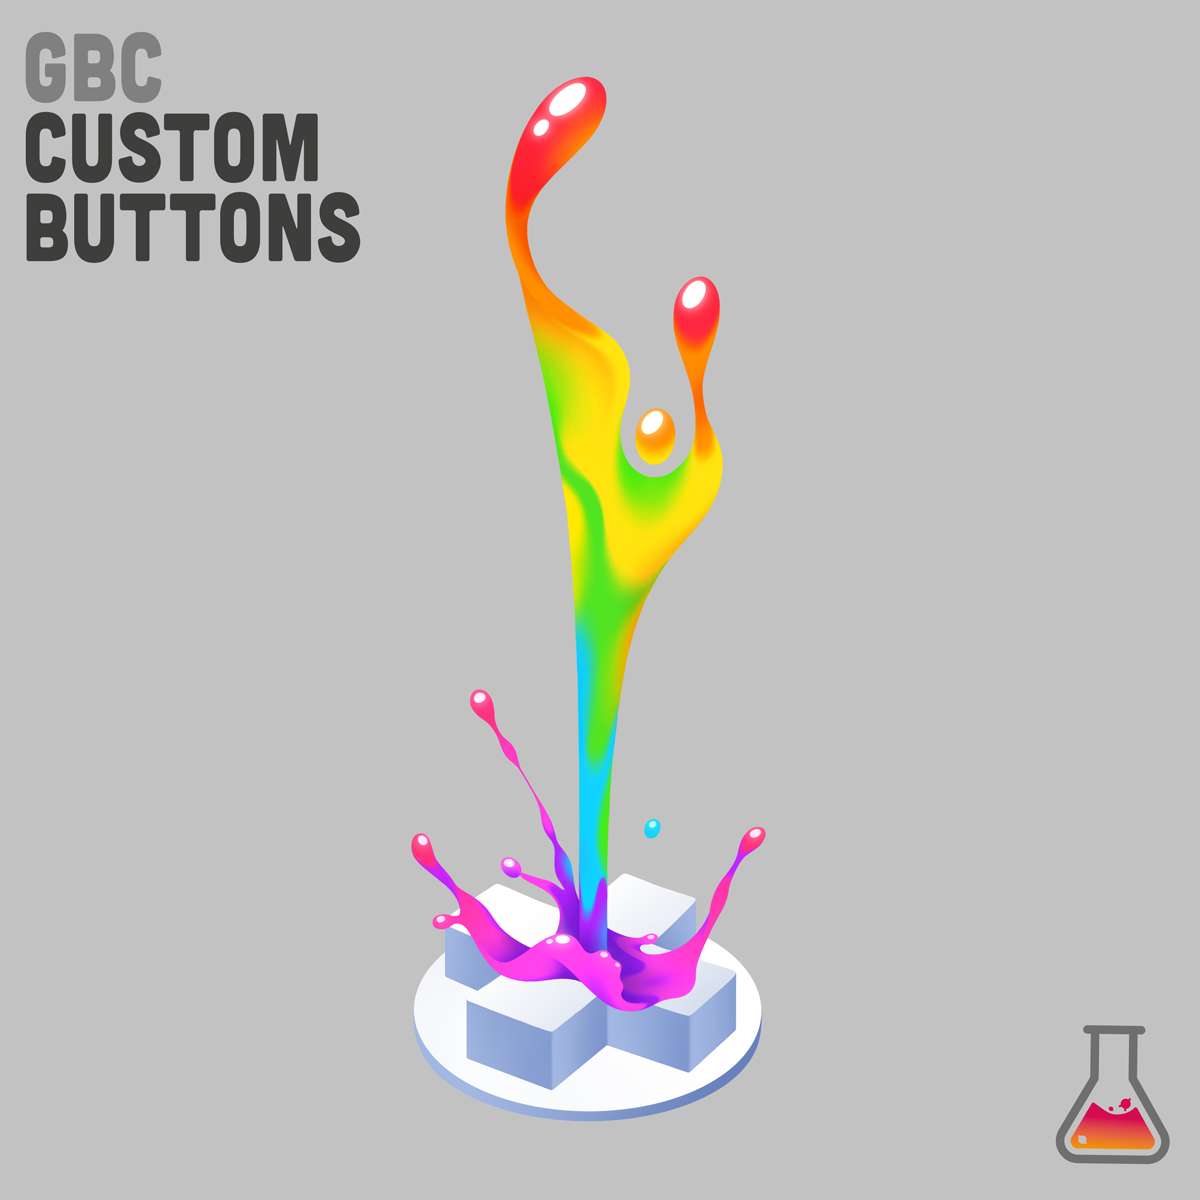 Game Boy Color - Your Custom Buttons